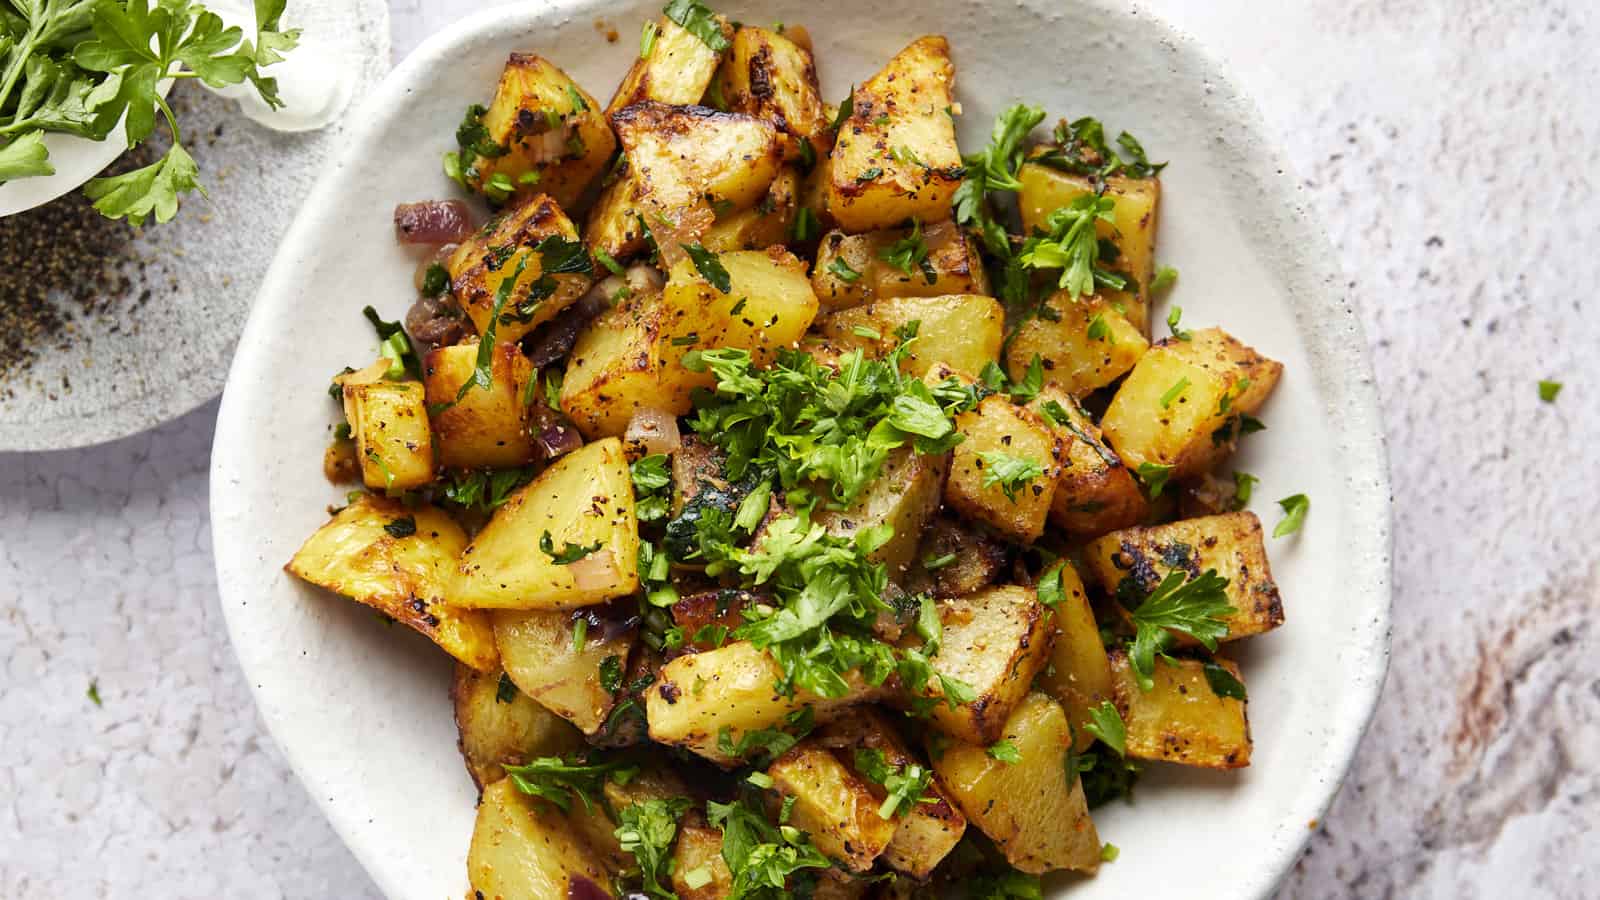 A plate of air fryer golden potatoes with harissa sauce topped with parsley.